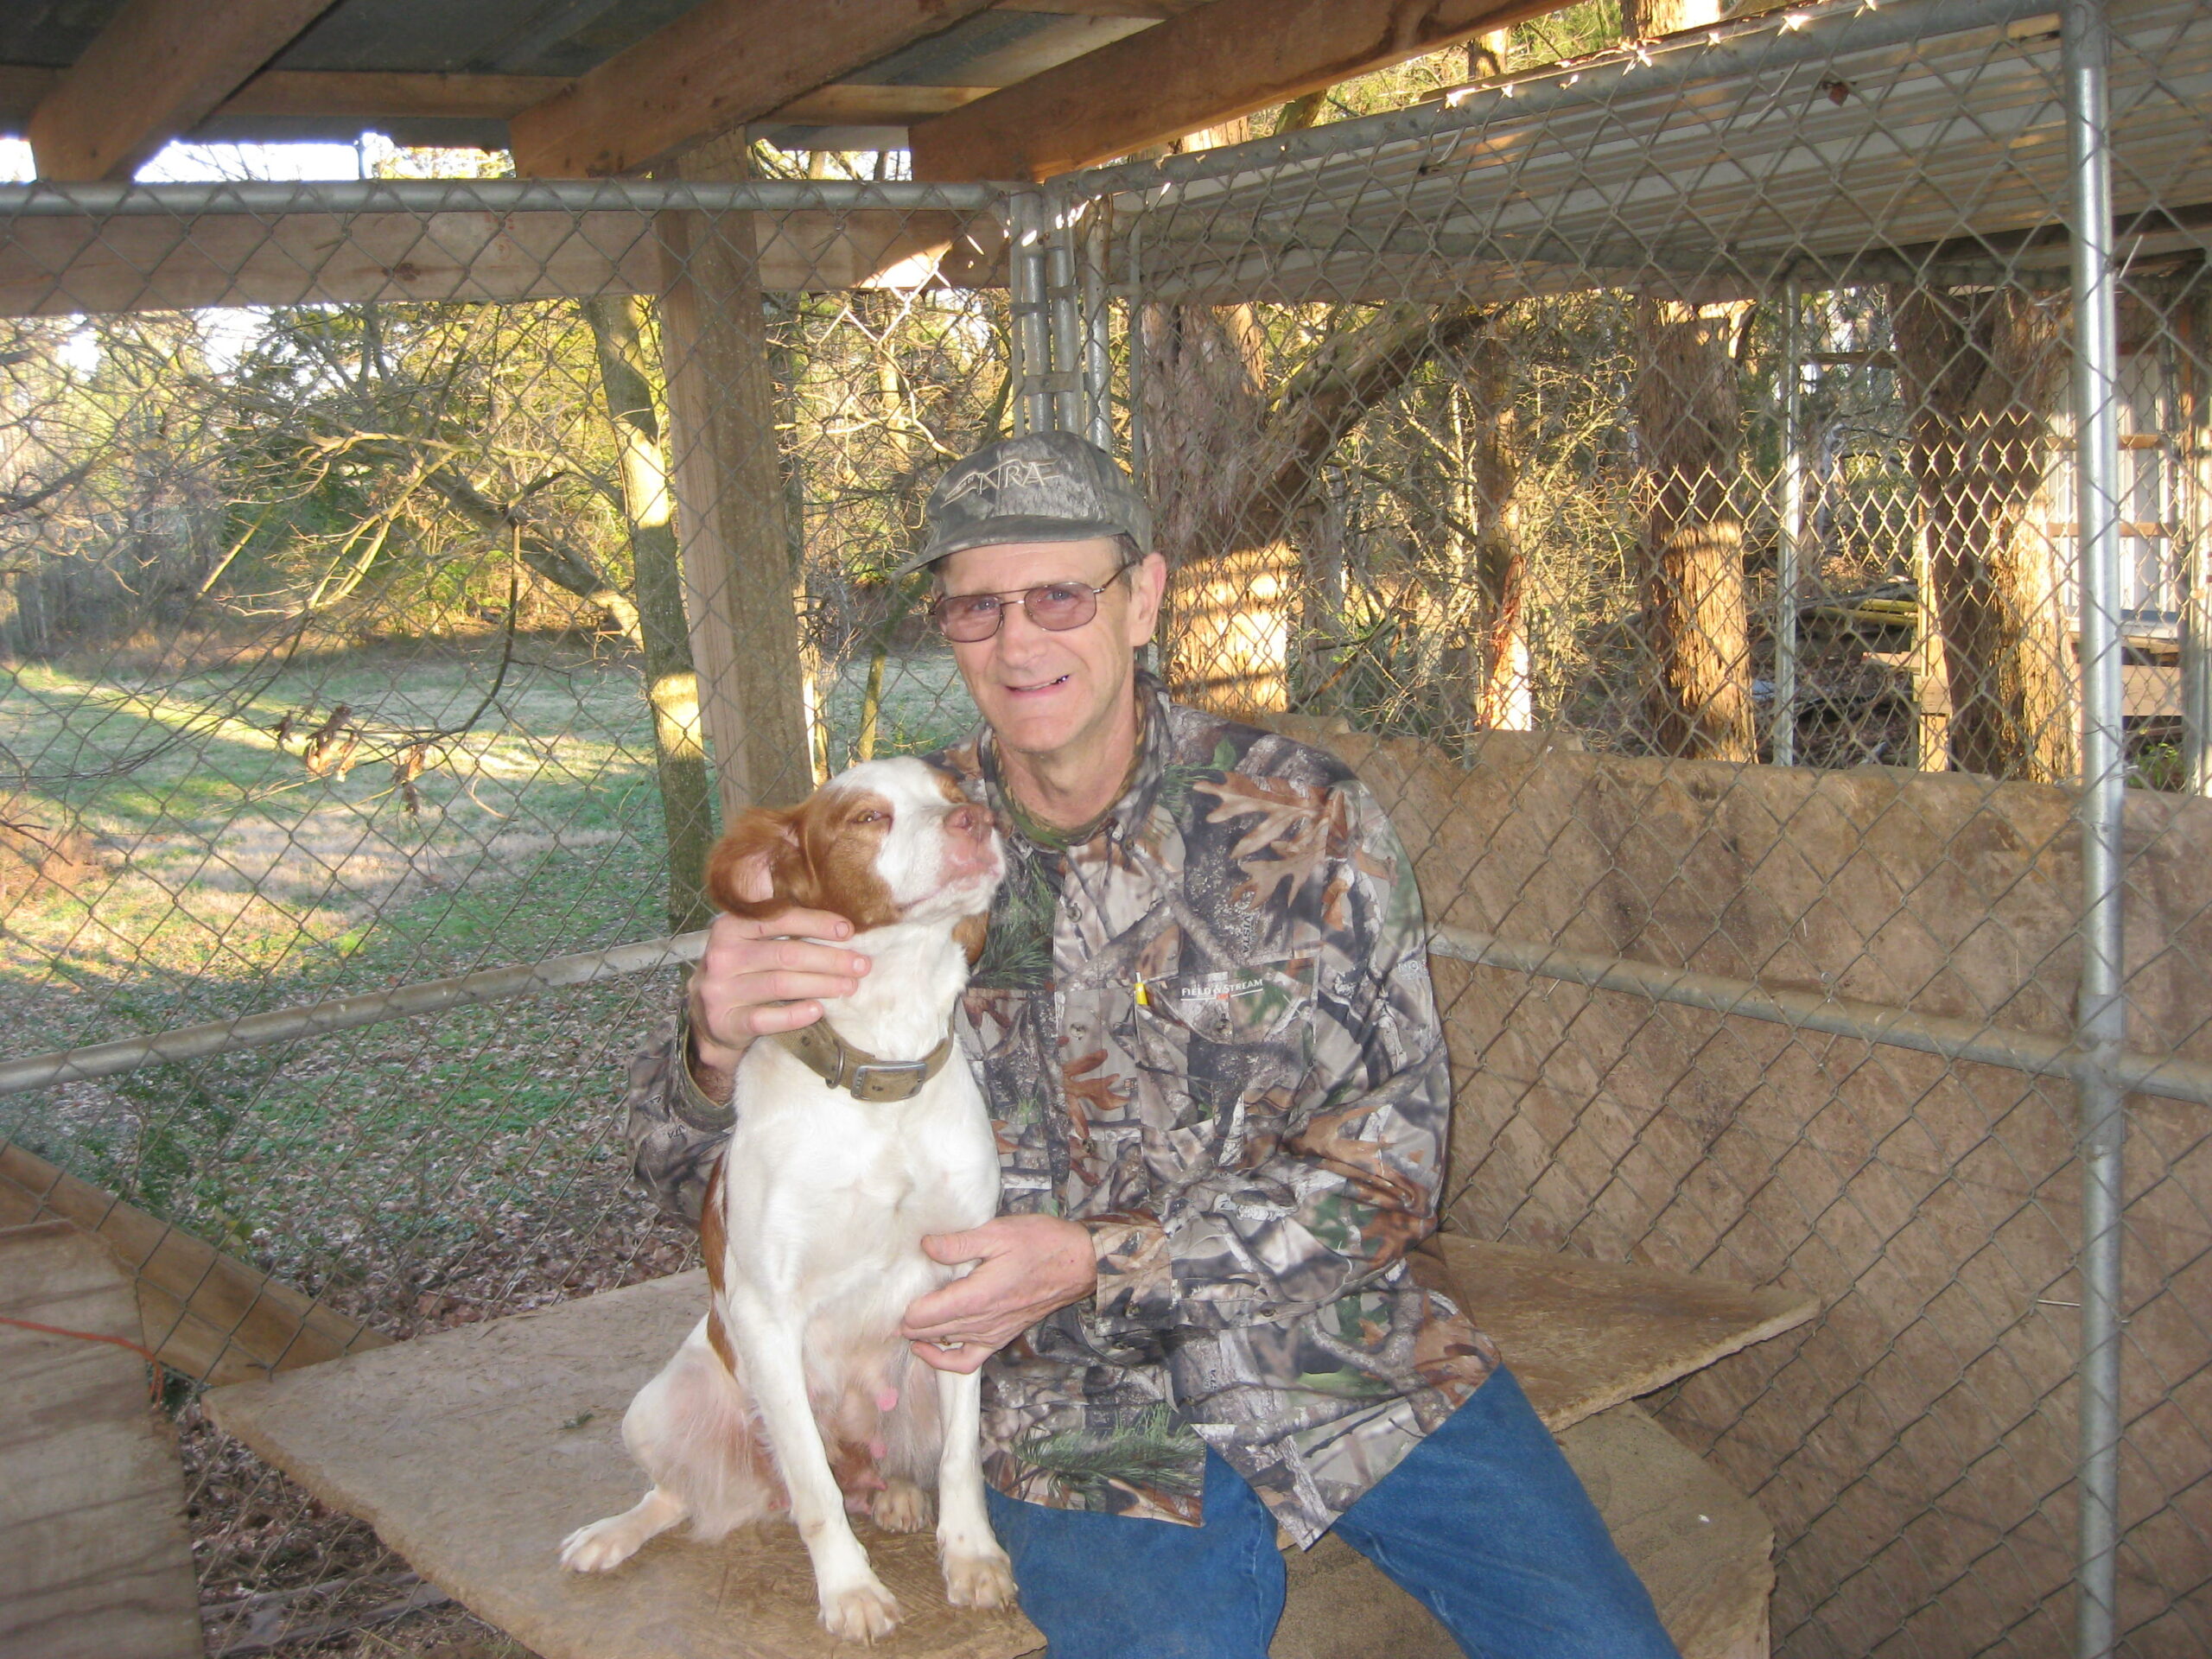 David Vowell with his dog.